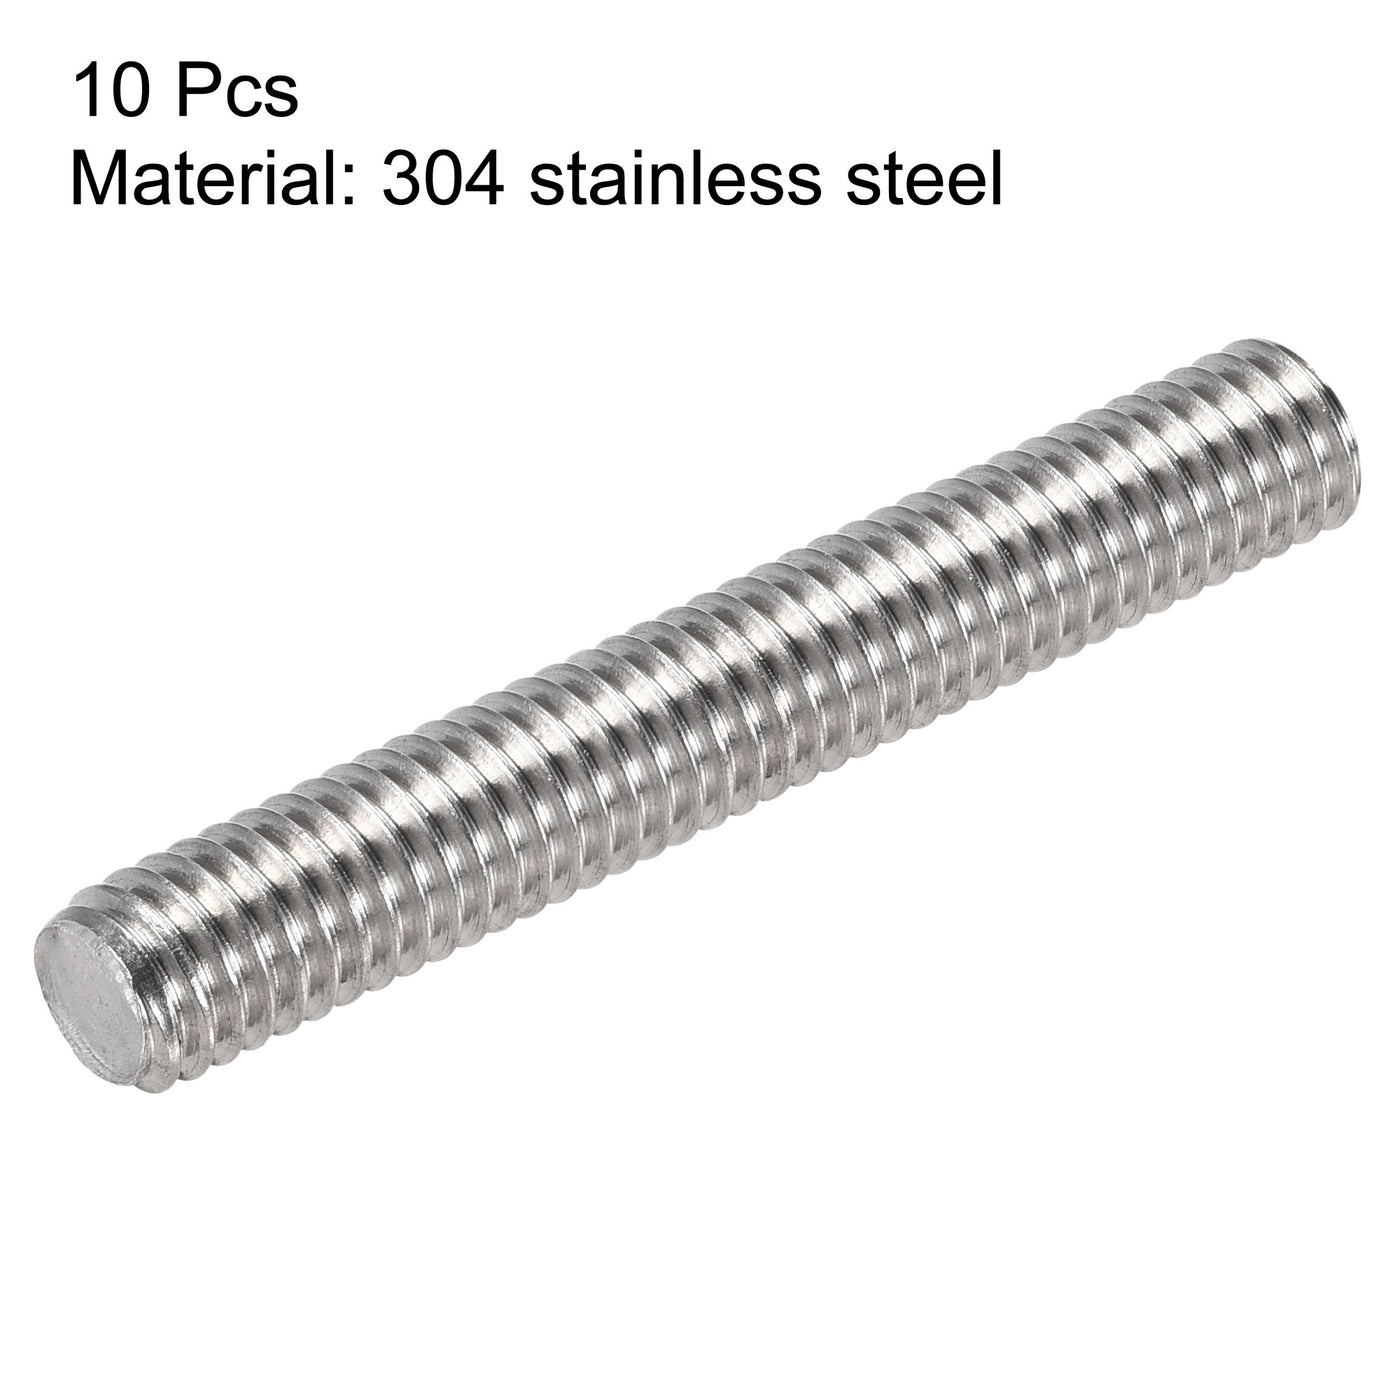 uxcell Uxcell 10pcs M6 x 40mm Fully Threaded Rod 304 Stainless Steel Right Hand 1.0mm Pitch